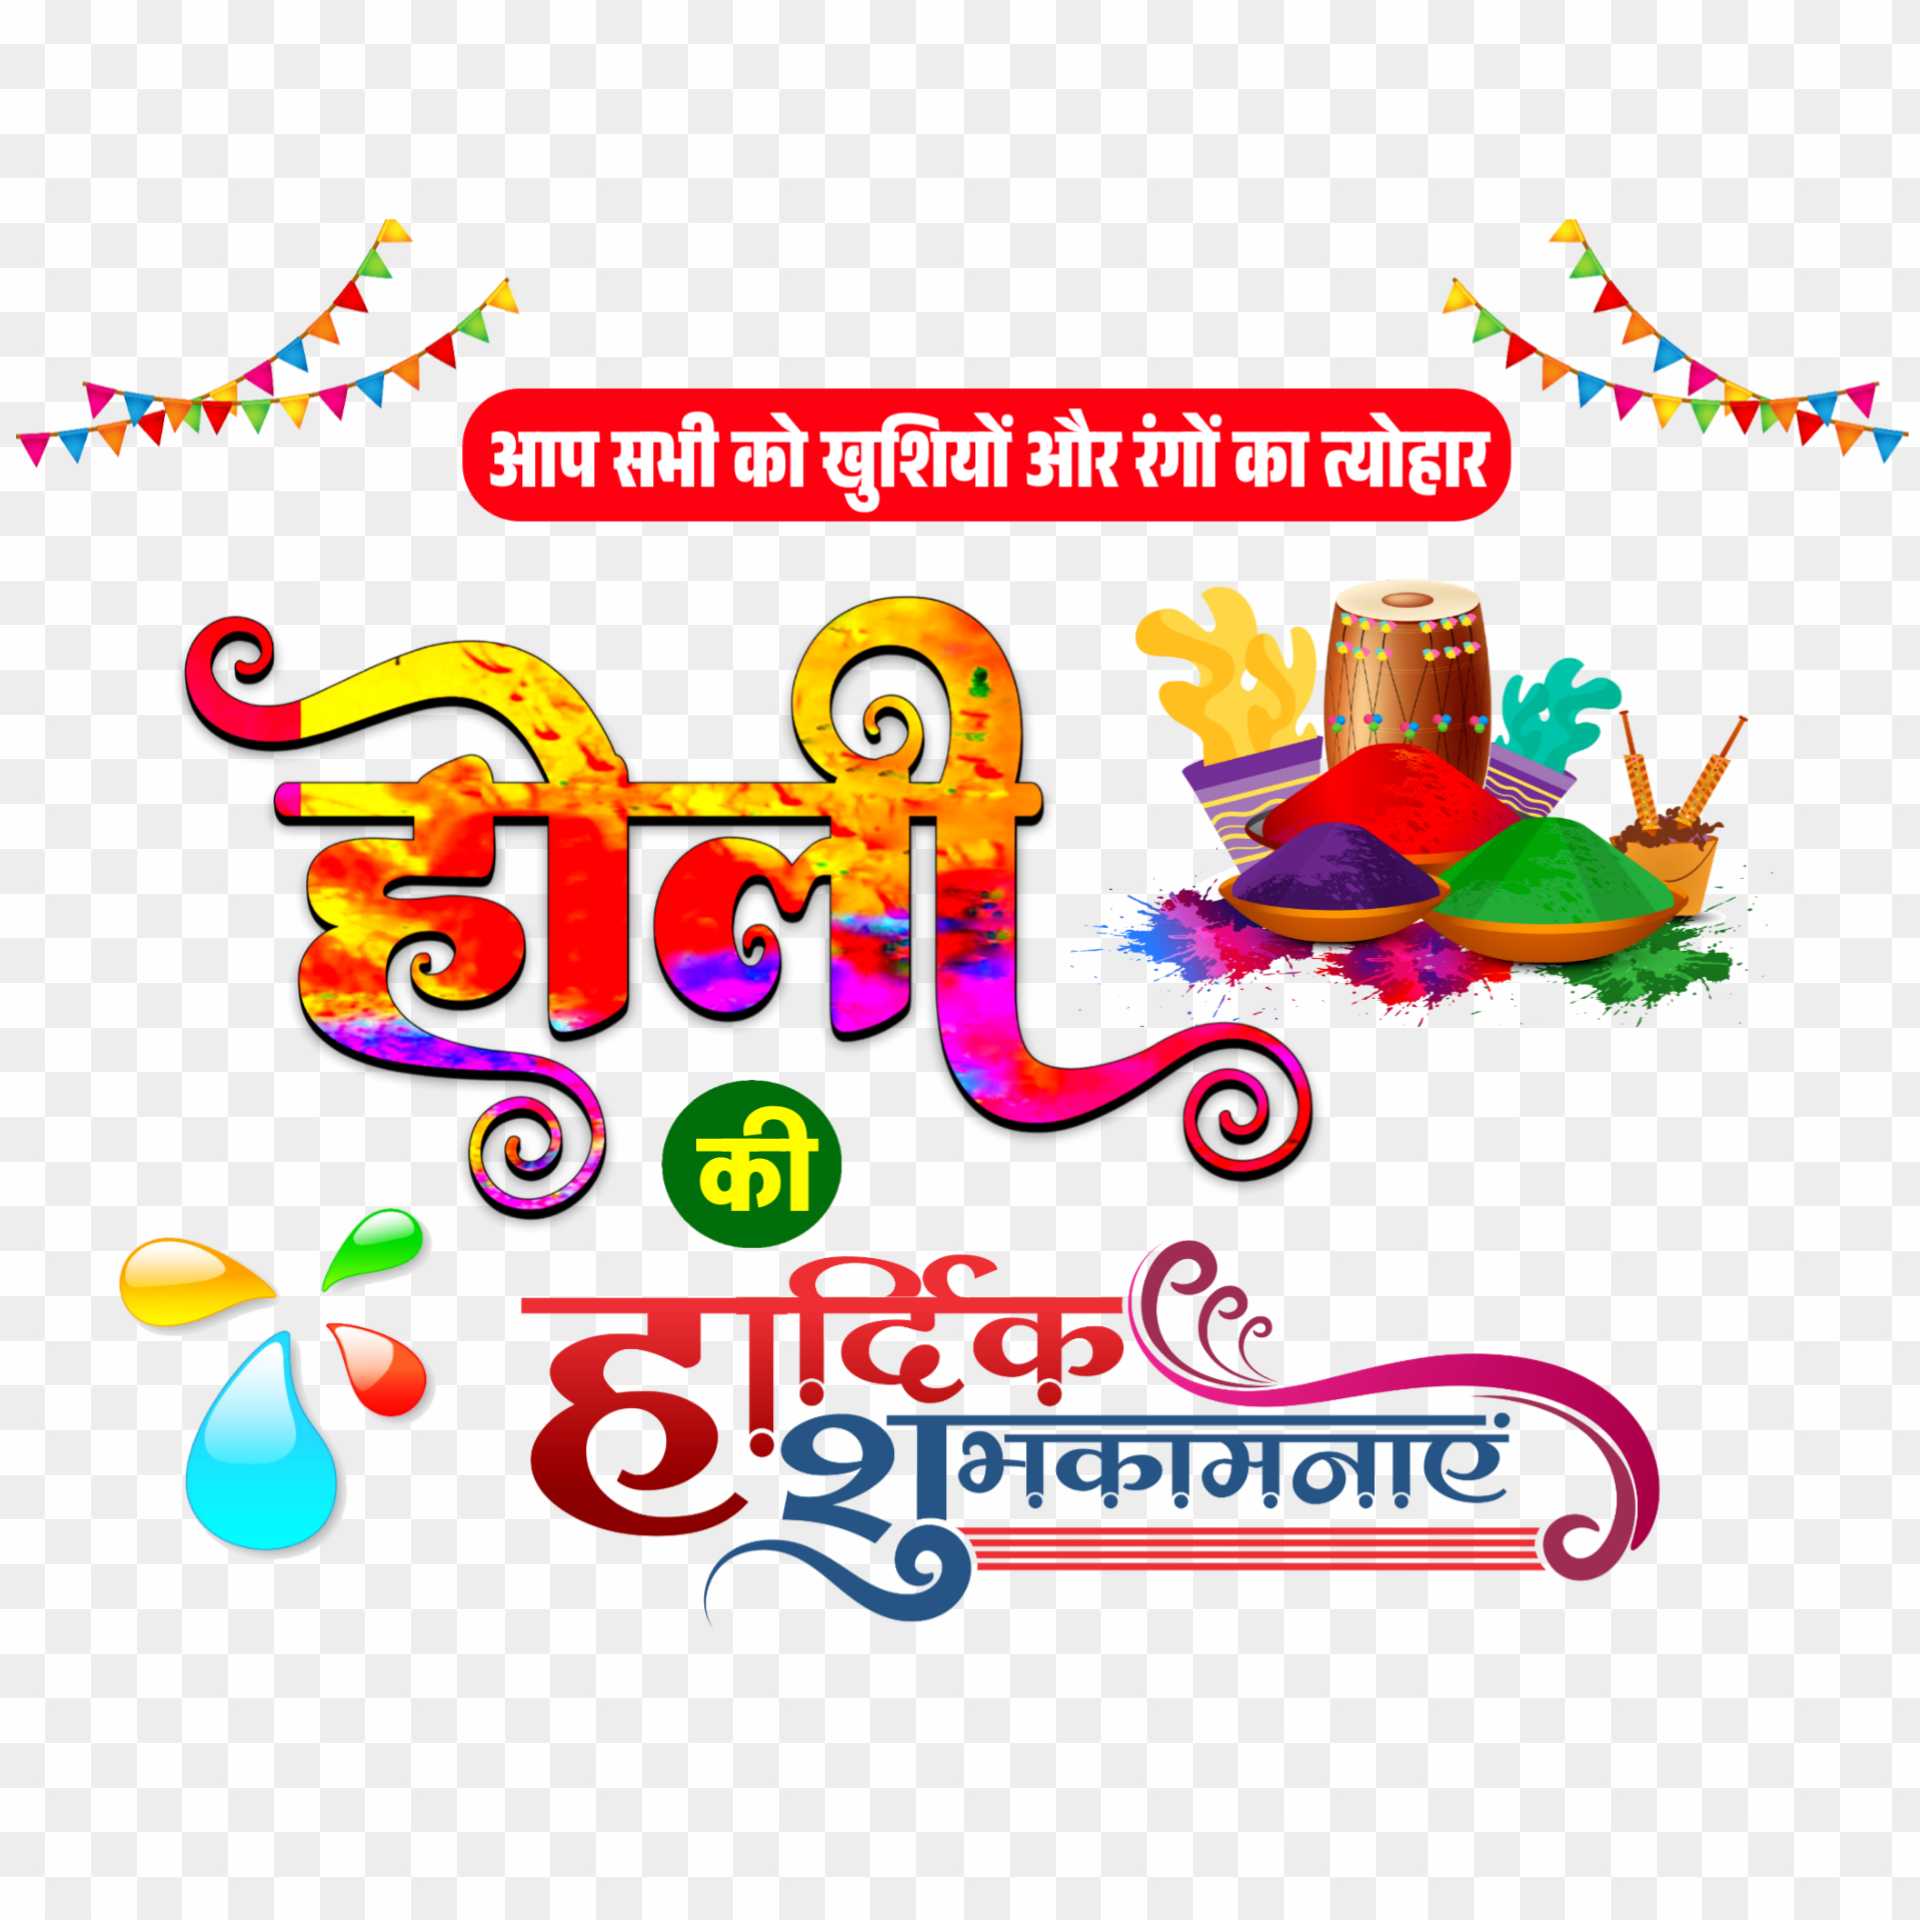 Holi poster in Hindi PNG images download 